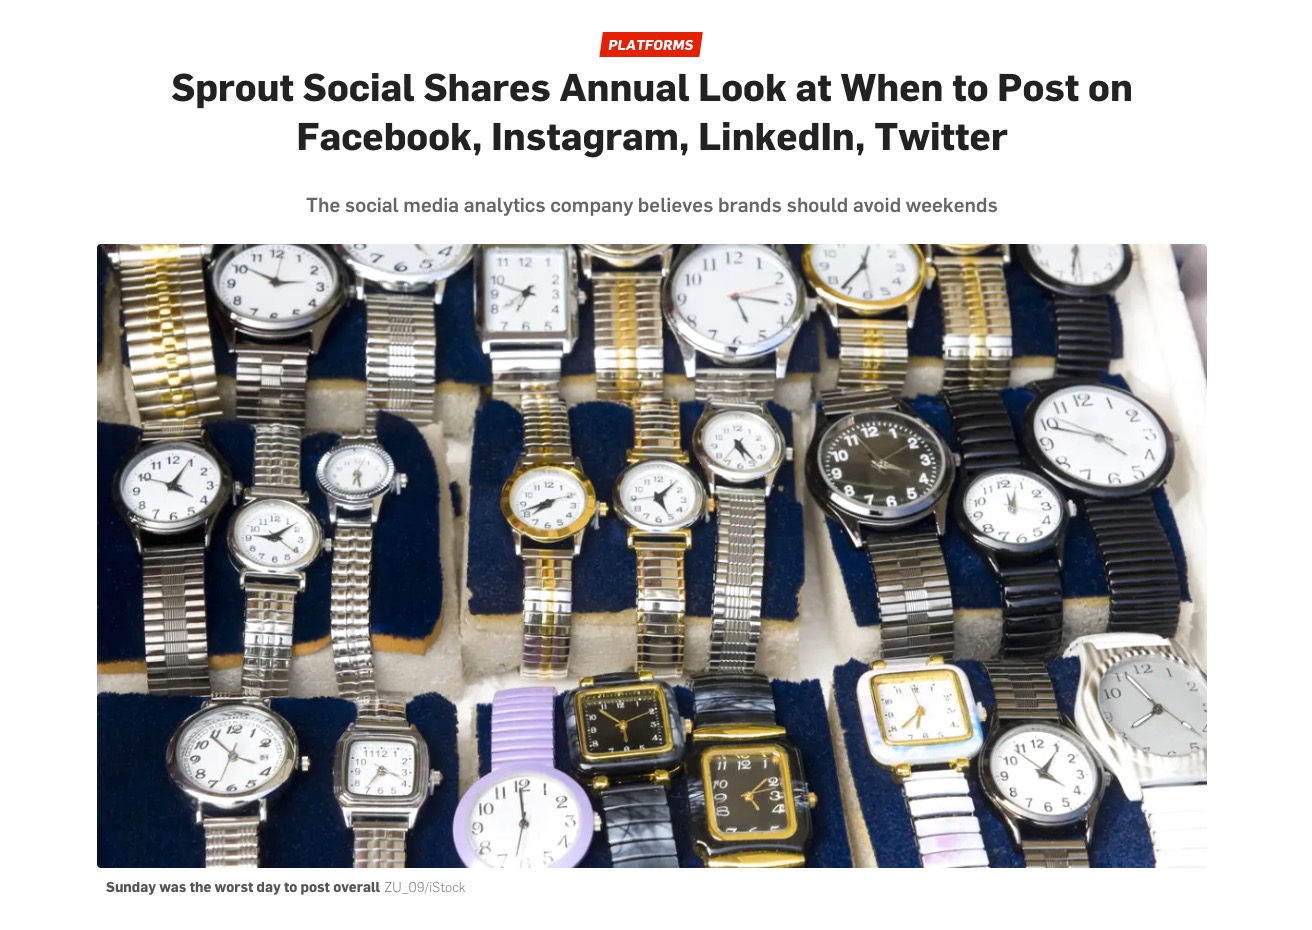 Earned media coverage of Sprout Social